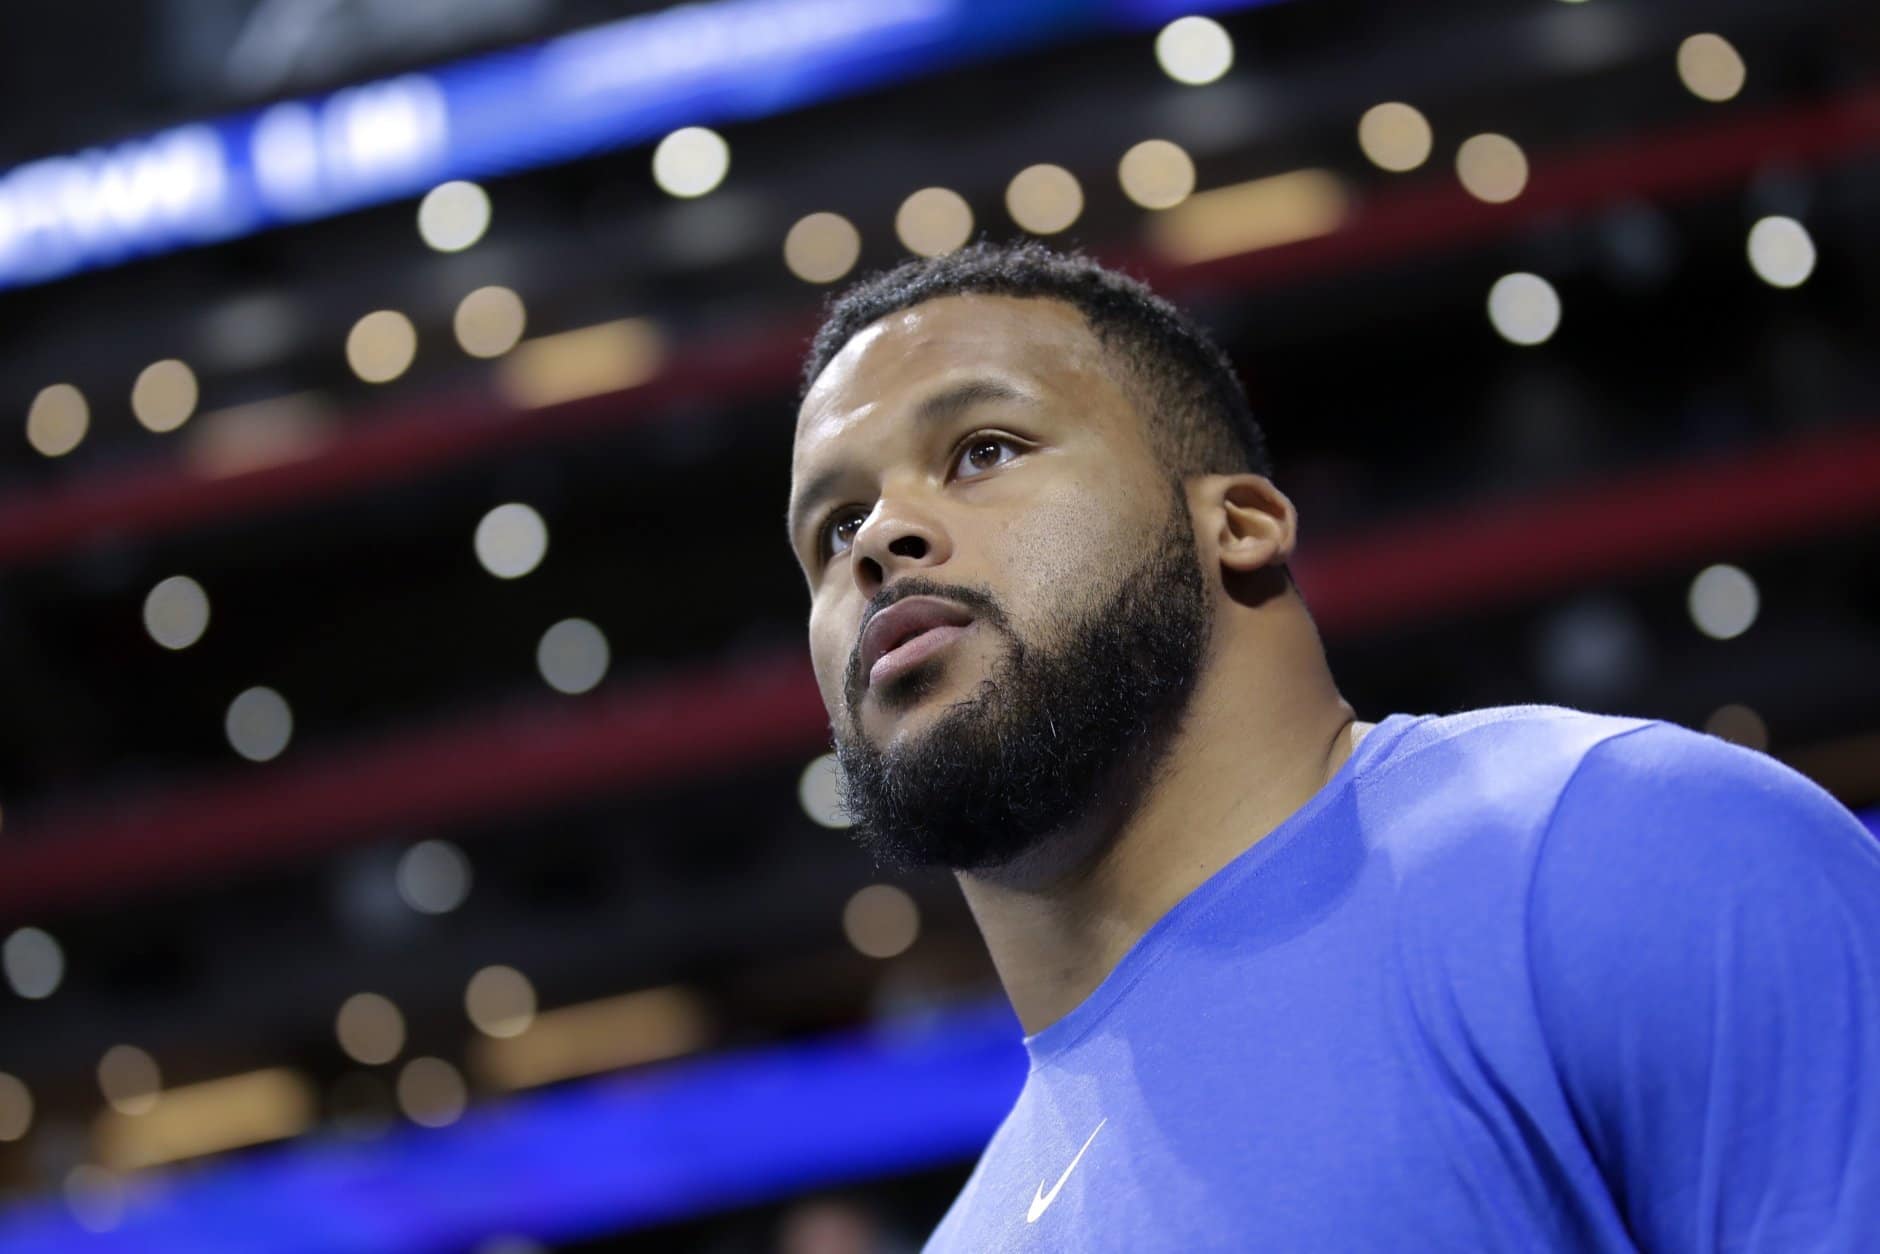 Los Angeles Rams' Aaron Donald arrives for warm-ups before the NFL Super Bowl 53 football against the New England Patriots Sunday, Feb. 3, 2019, in Atlanta. (AP Photo/Carolyn Kaster)